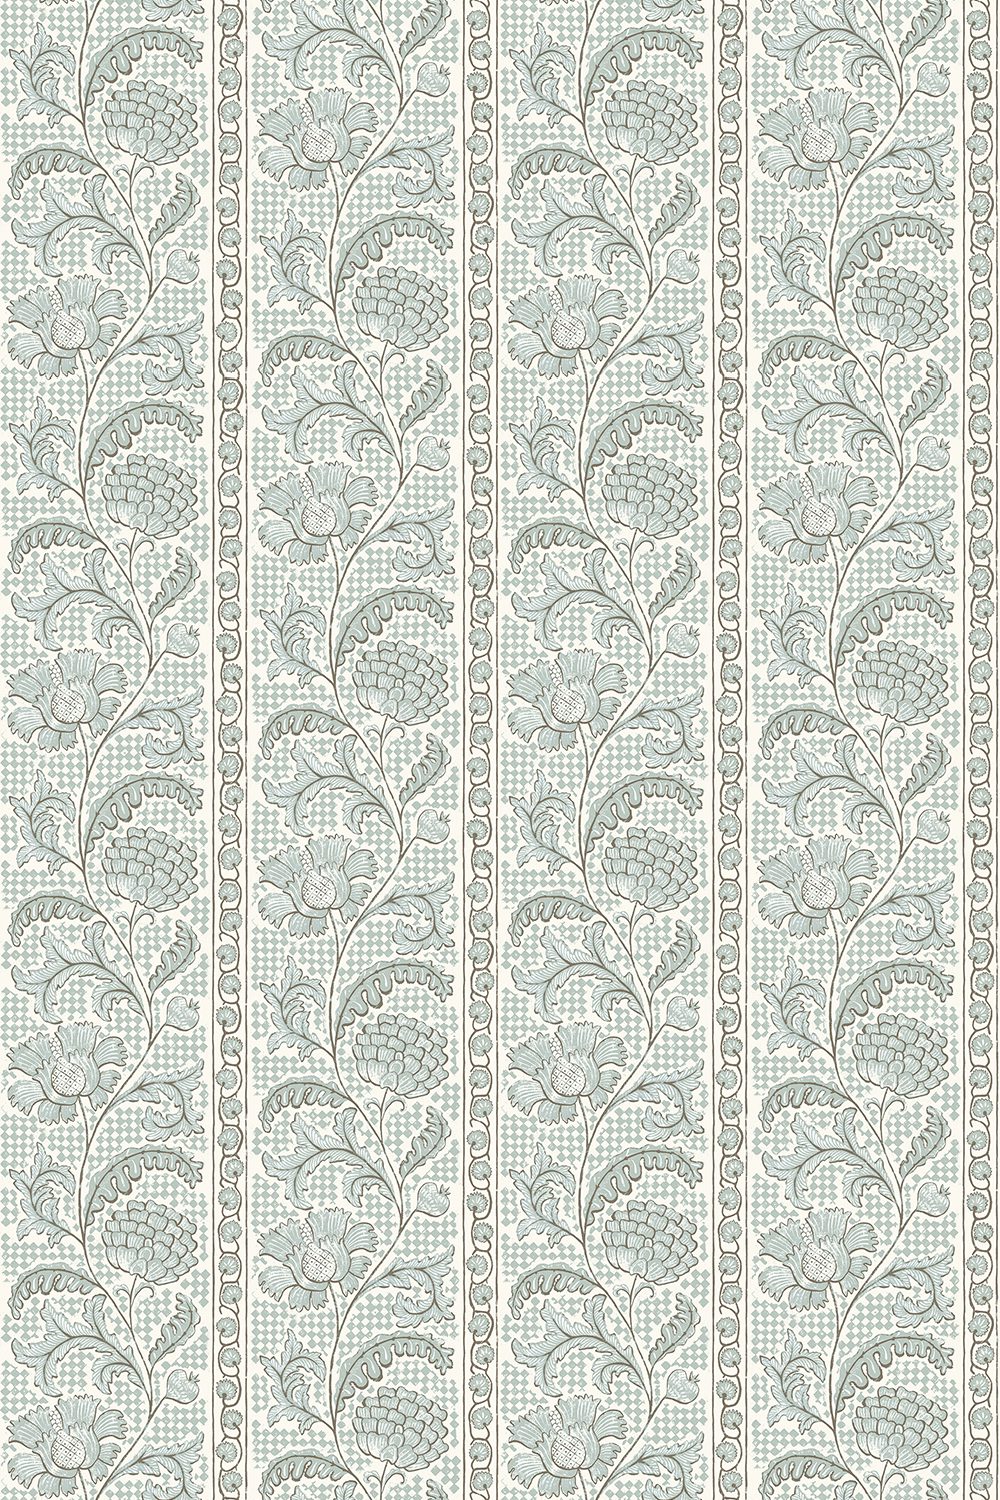 Josephine-Munsey-Floral-Check-Wallpaper-Barton-Blue-Cotswold-White-trailing-floral-stripes-against-checkered-background-off-white-soft-blue-traditional-cottage-style-British-Designer-hand-painted-printed